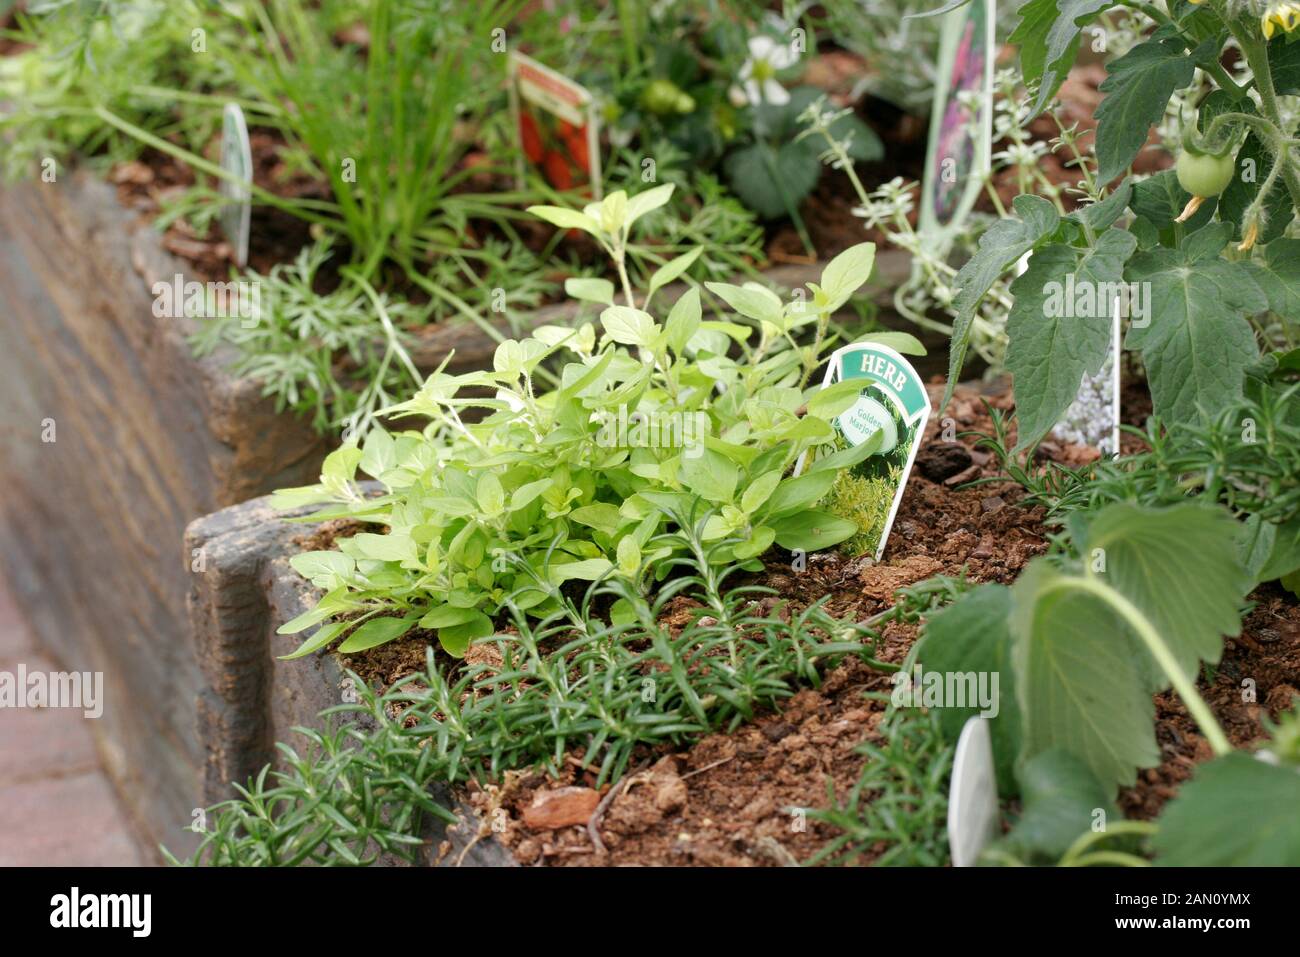 MIXED HERBS AND TOMATO PLANTS IN CONTAINER Stock Photo